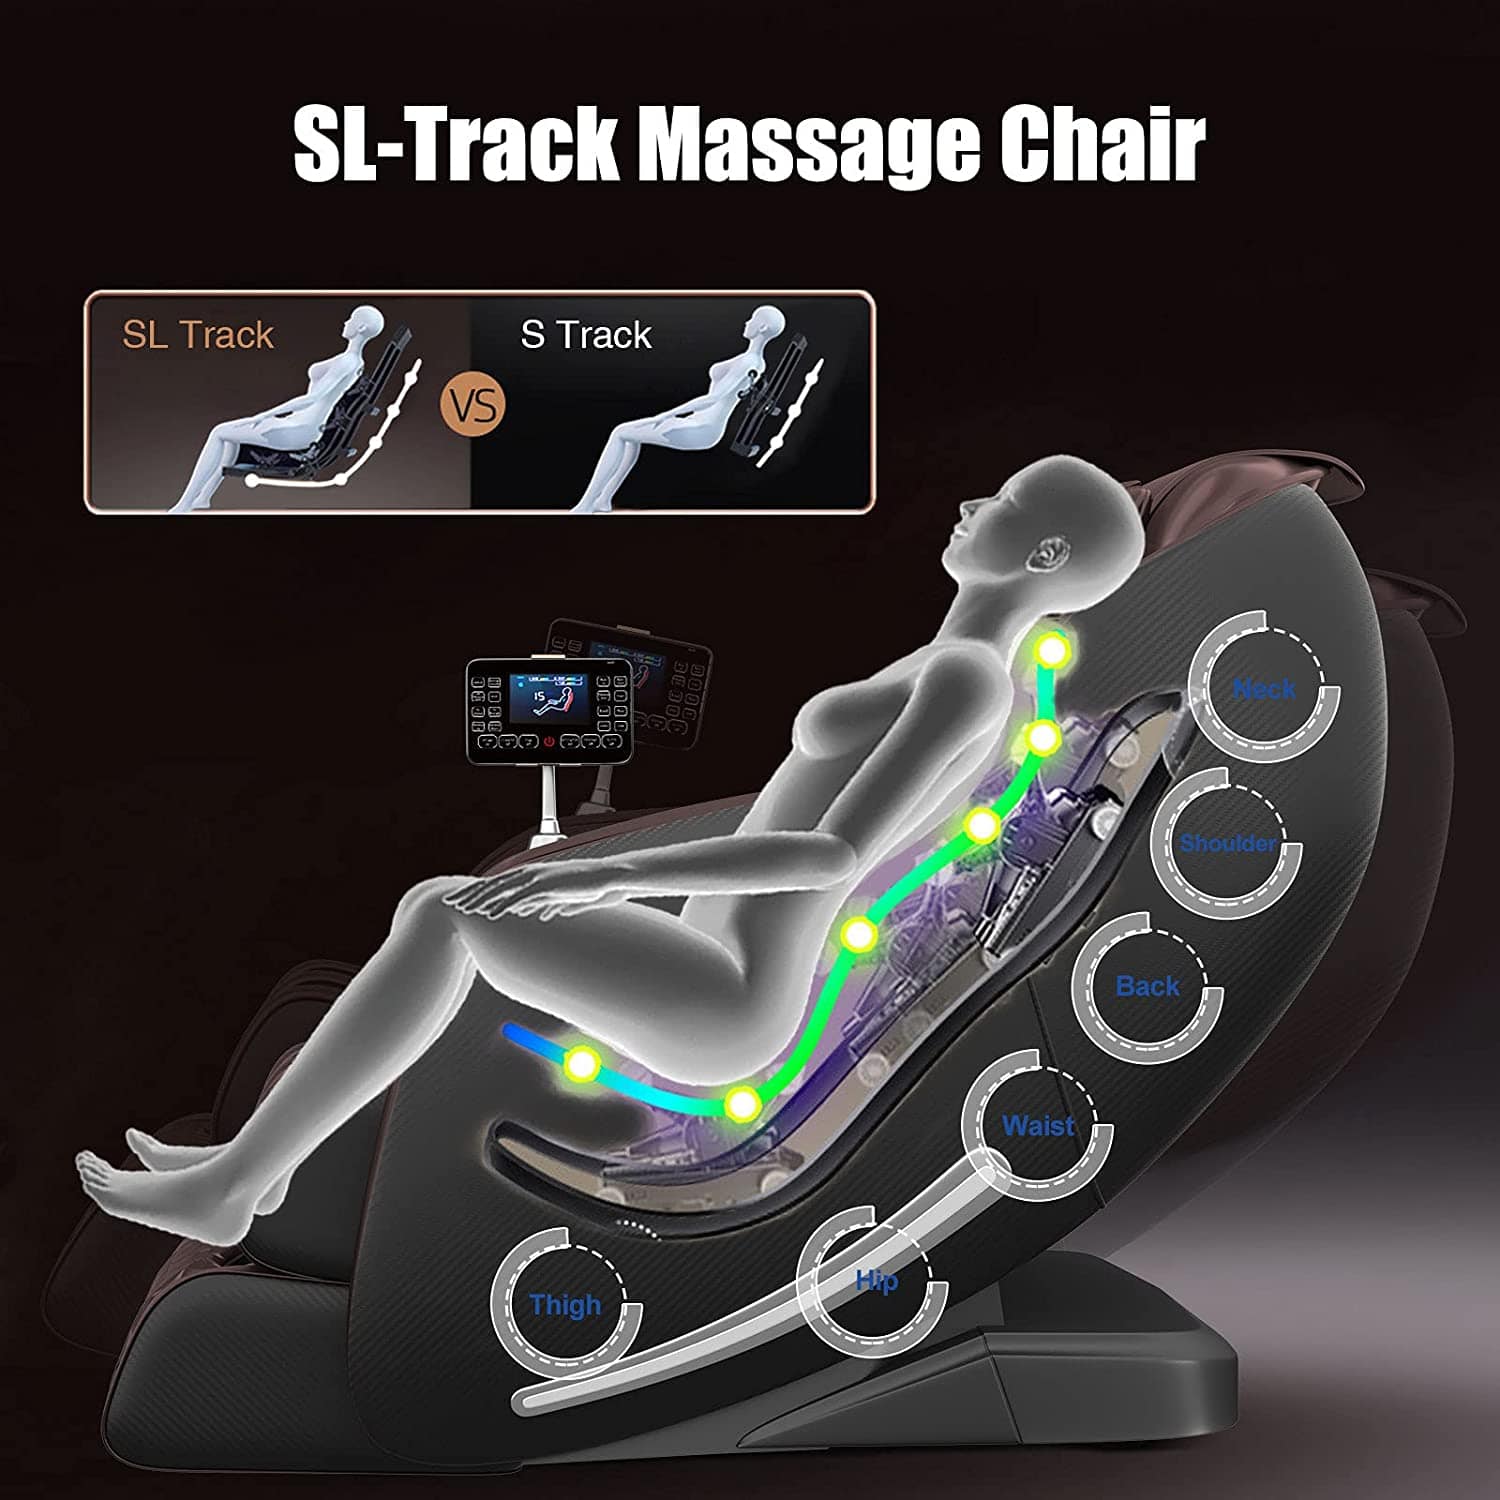 Real Relax notShow Favor-06 Massage Chair Brown A